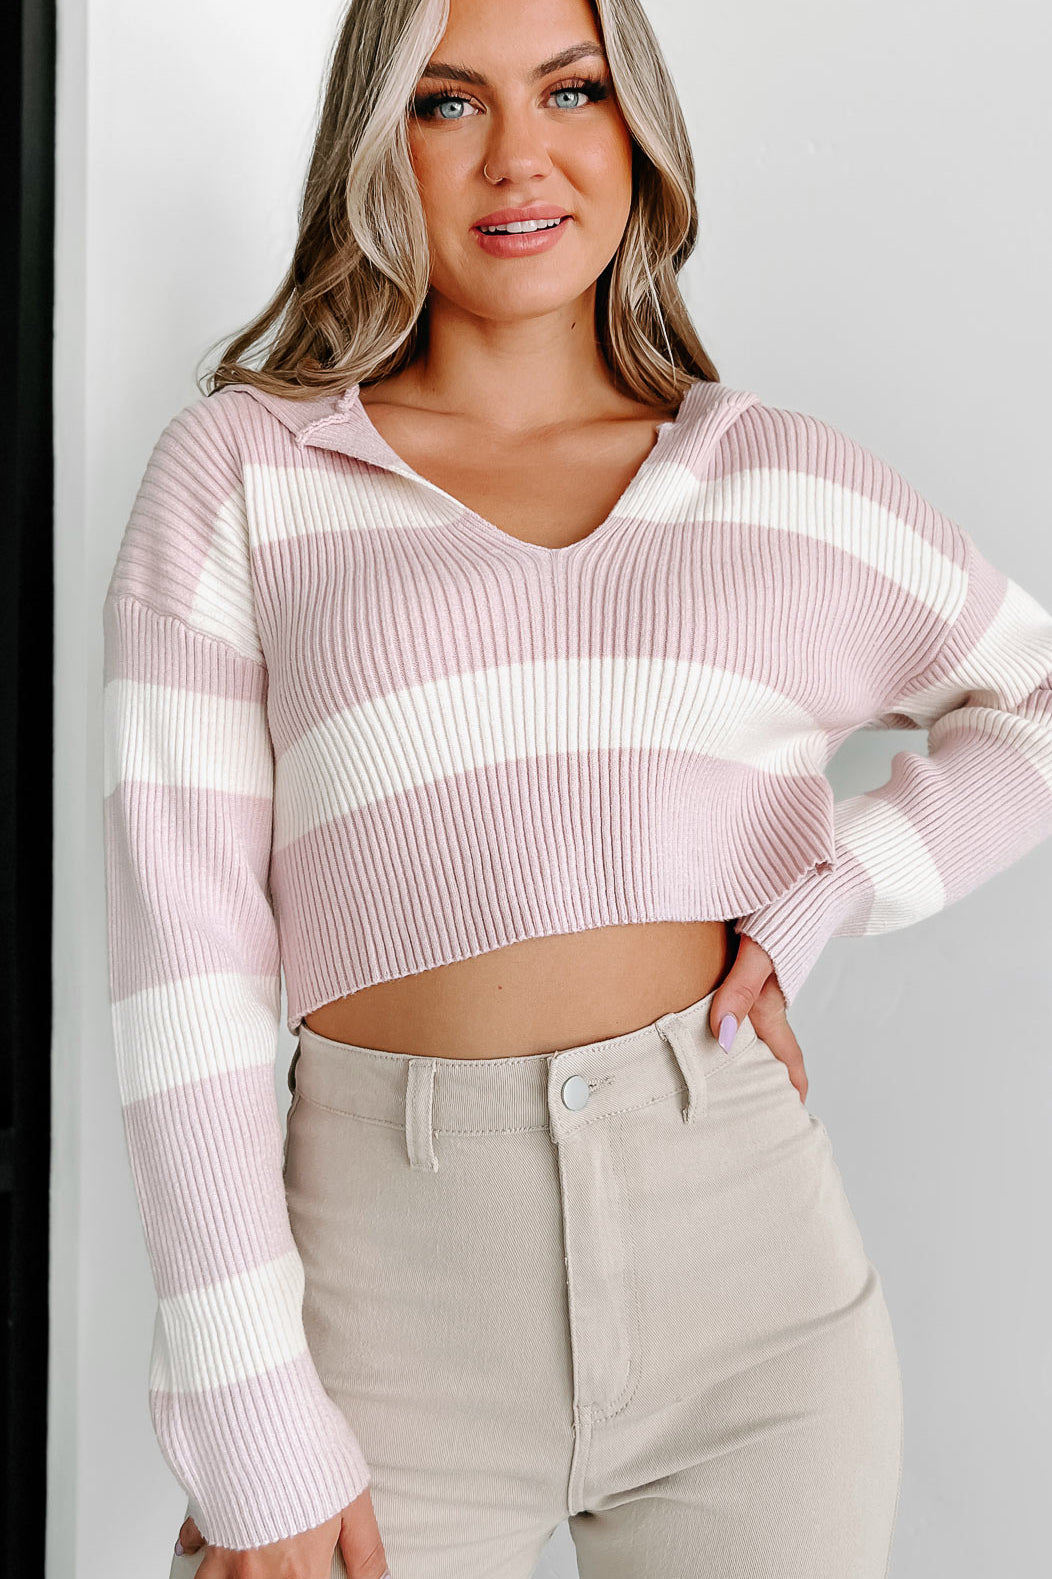 Easing Into Fall Hooded Striped Crop Sweater (Cream/Pink) - NanaMacs